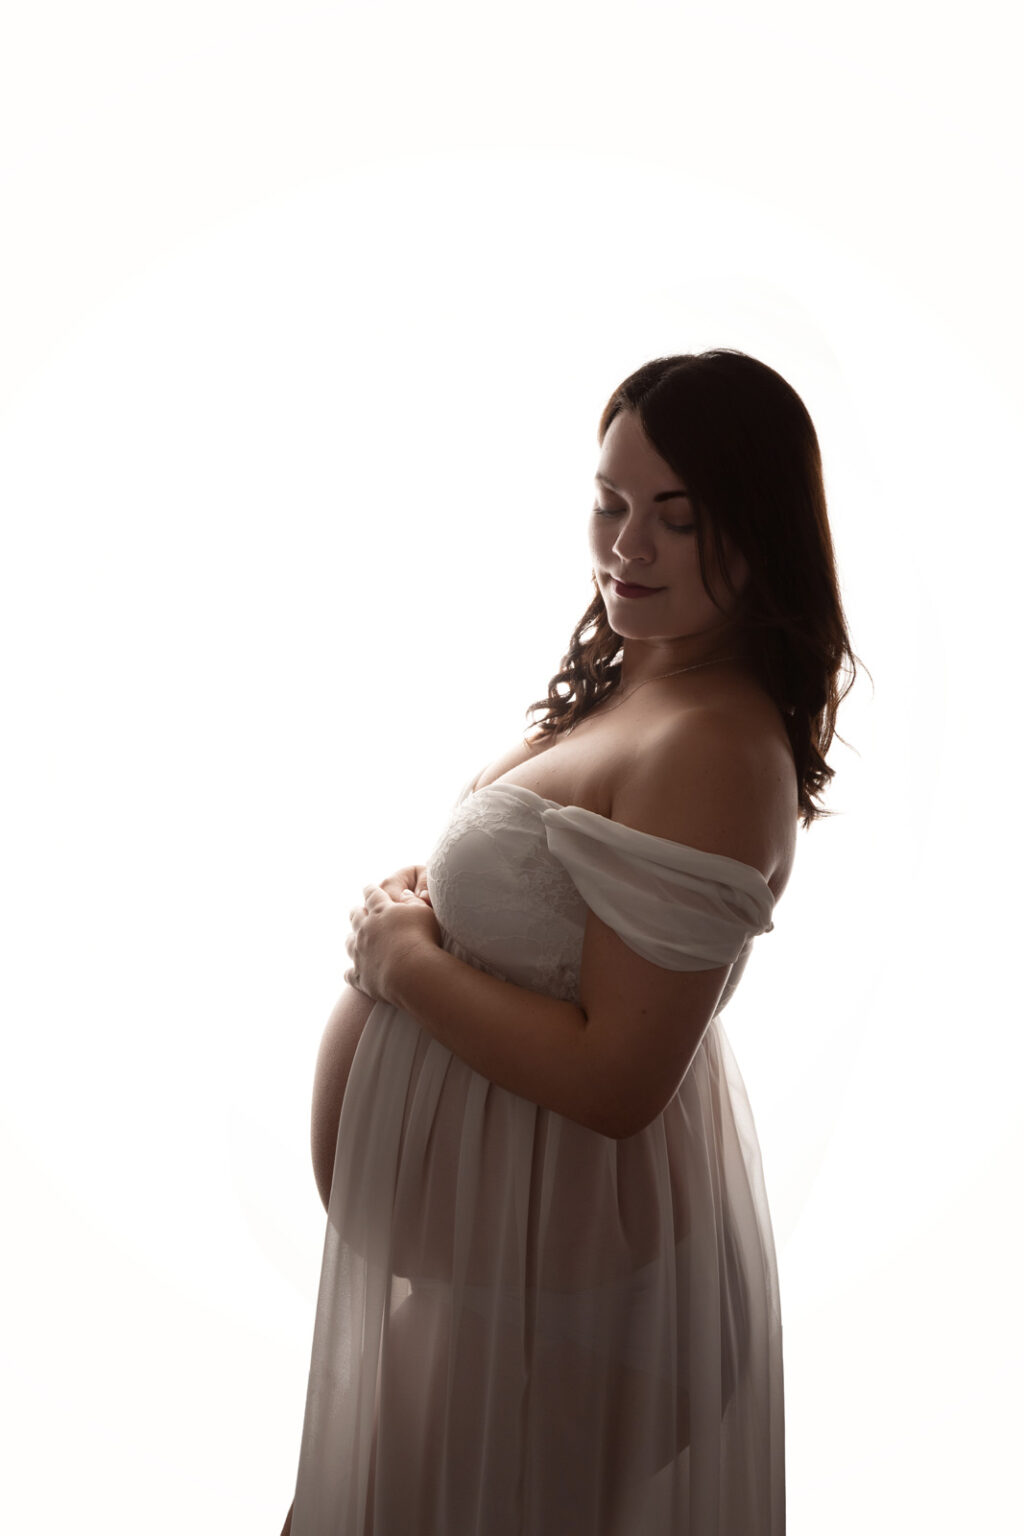 Pregnant lady posing for maternity photoshoot at H Jones Photography studio in Andover.